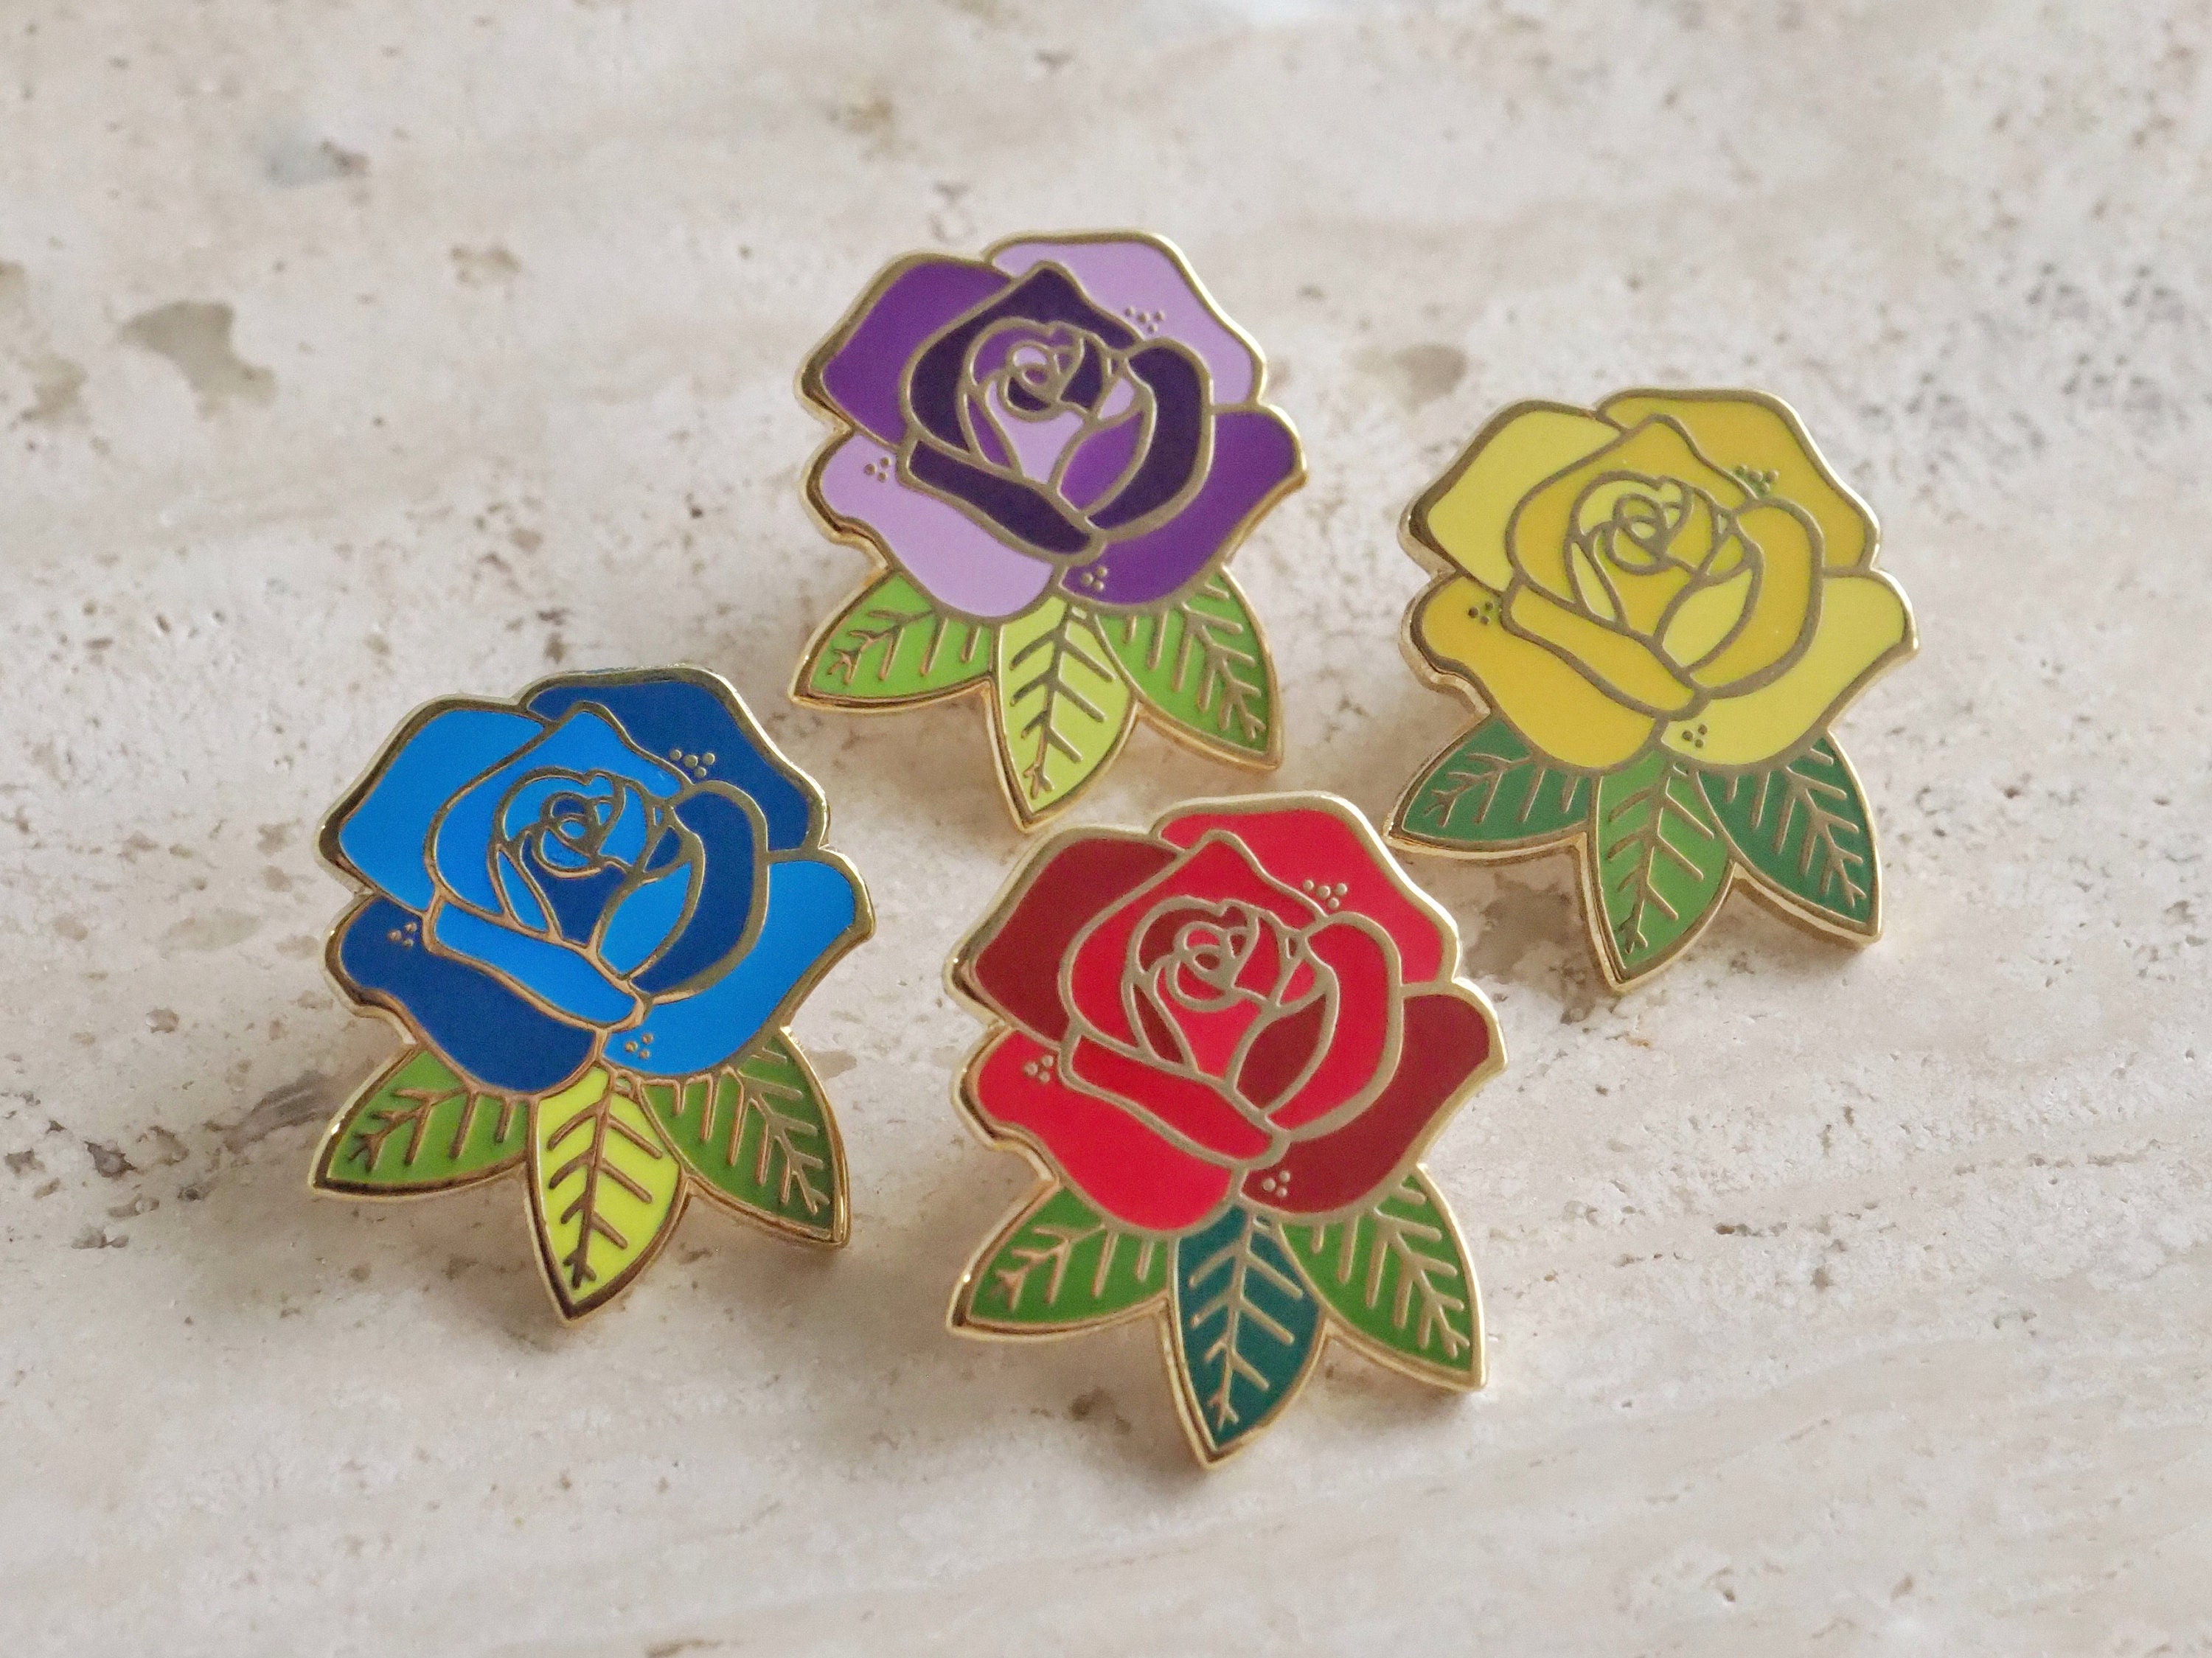 Lot of 4 Flower / Roses Stick / Lapel / Scarf Pins - Ruby Lane